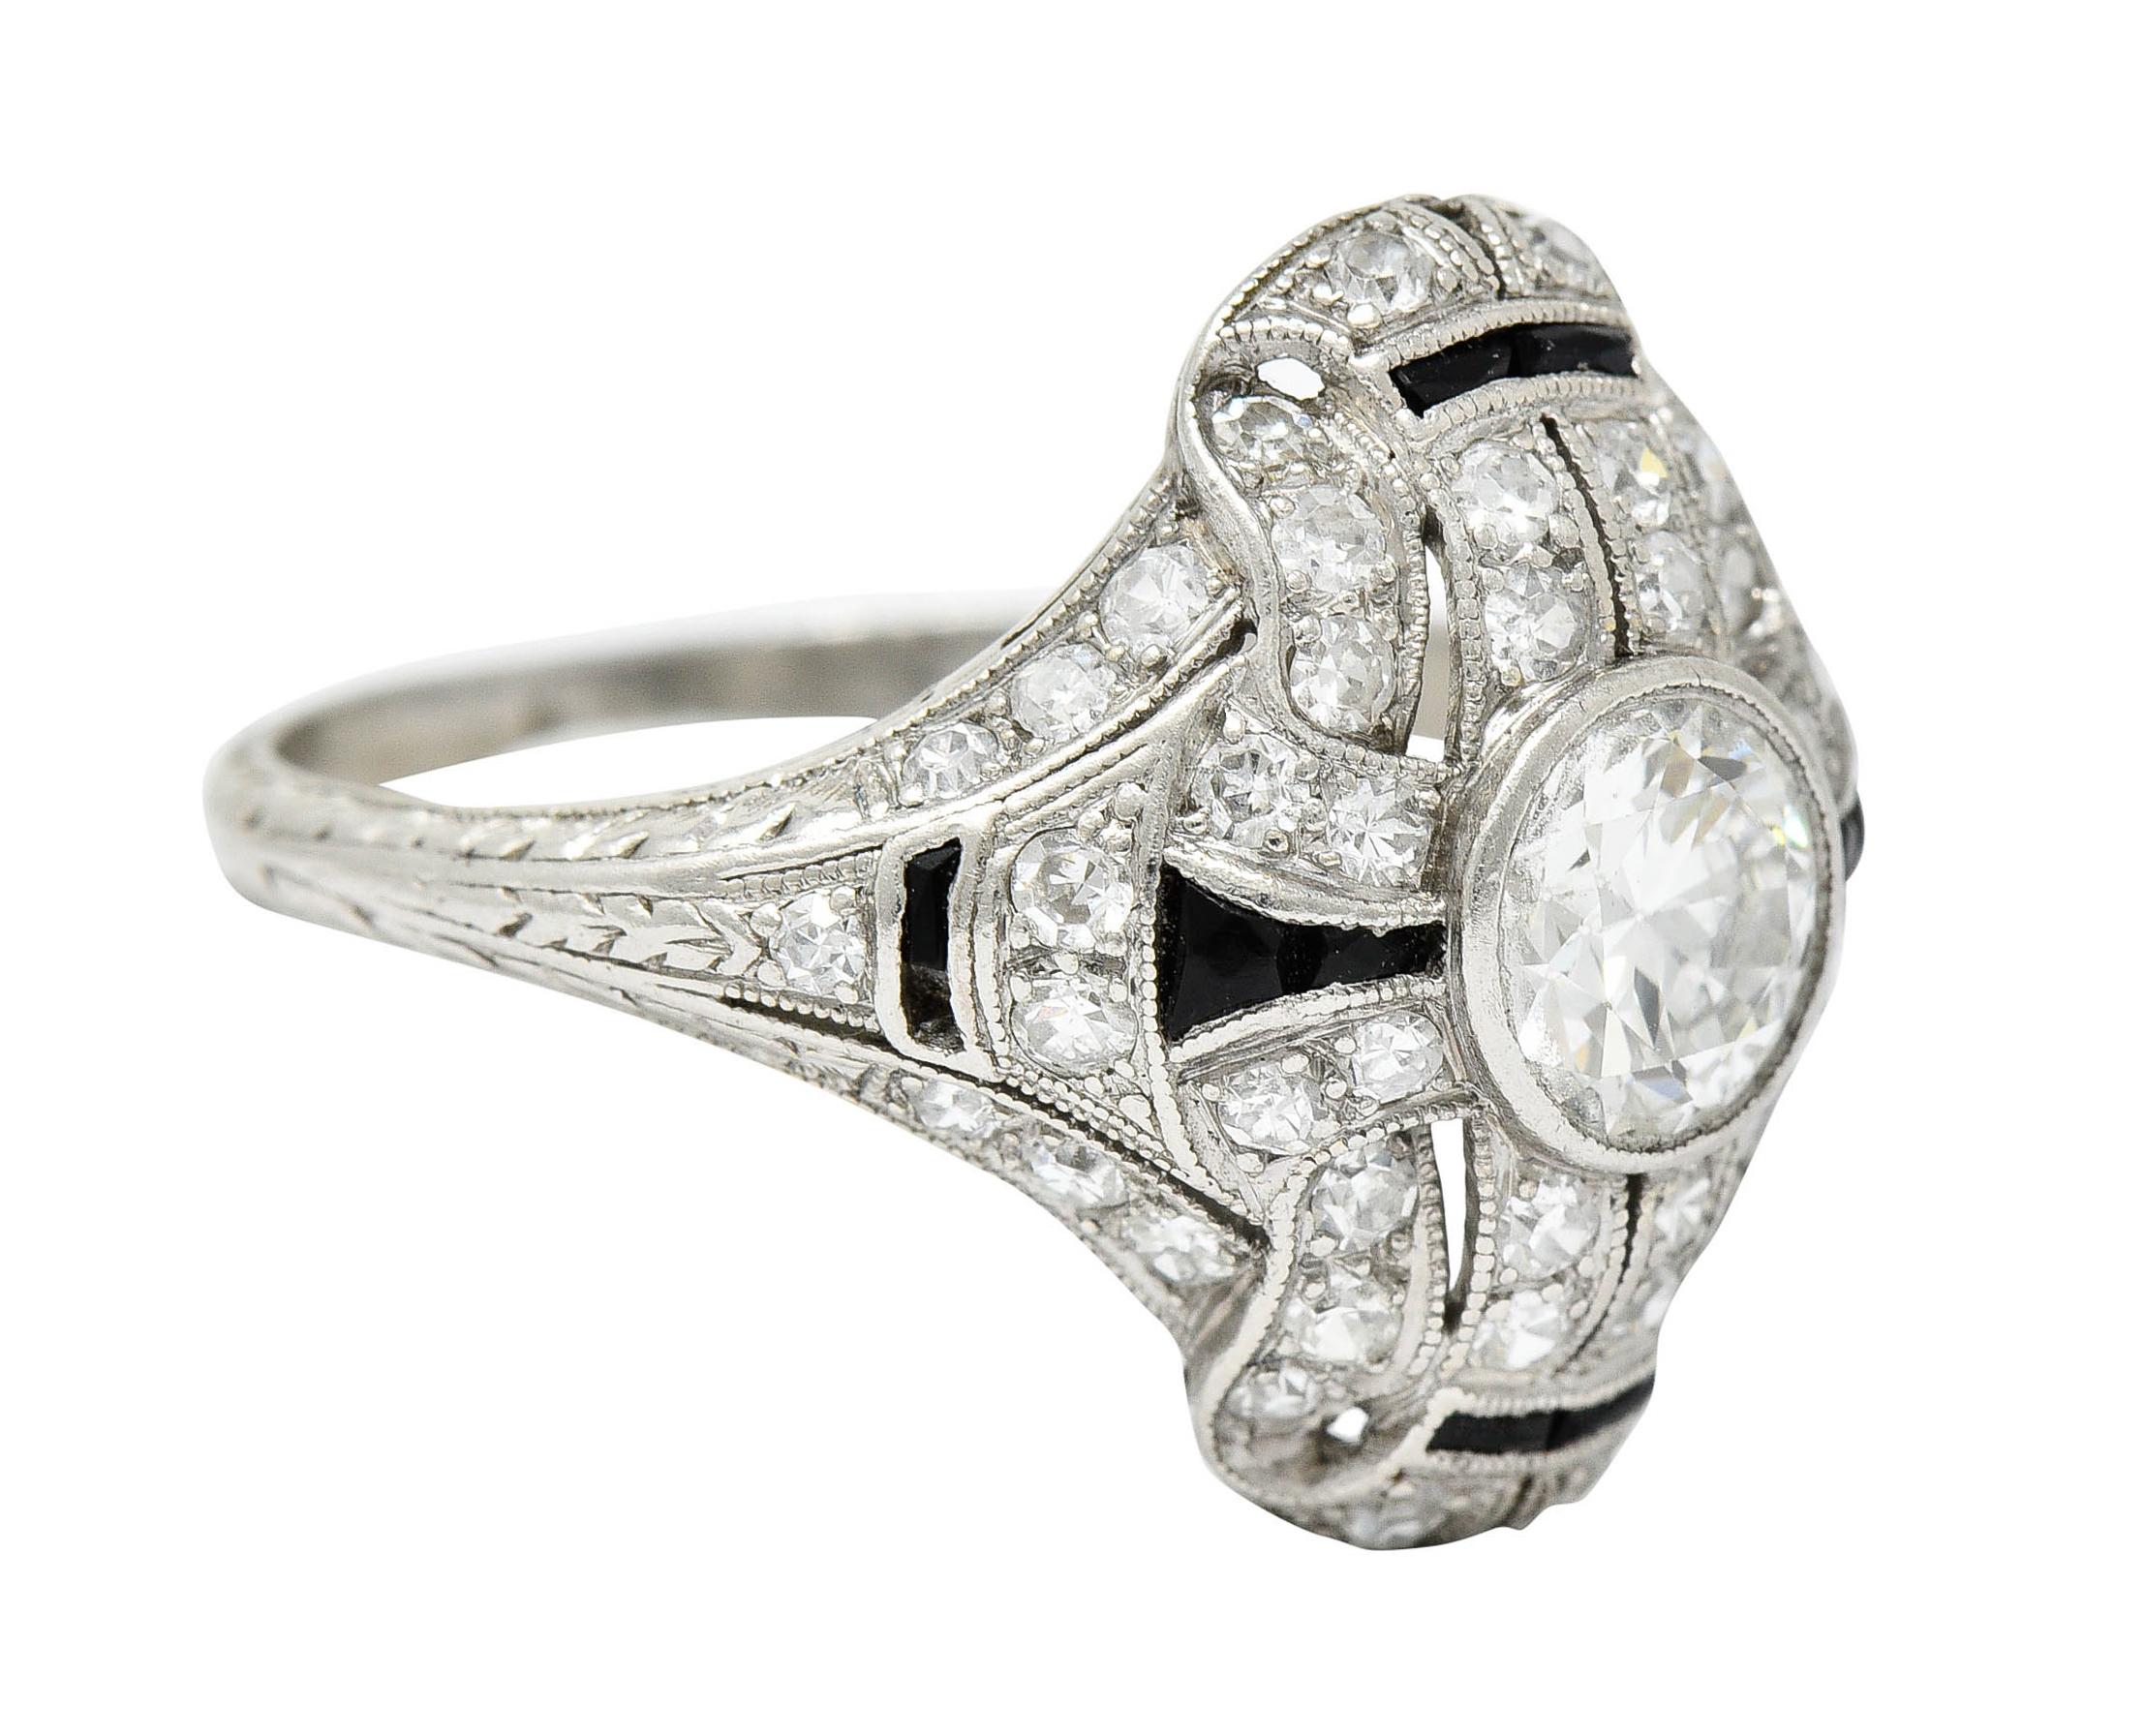 Centering a transitional cut diamond weighing approximately 0.80 carat - J color with VS clarity

Bezel set in a dinner style ring accented by calibrè cut onyx

Set throughout by single cut diamonds weighing in total approximately 1.00 carat - G to